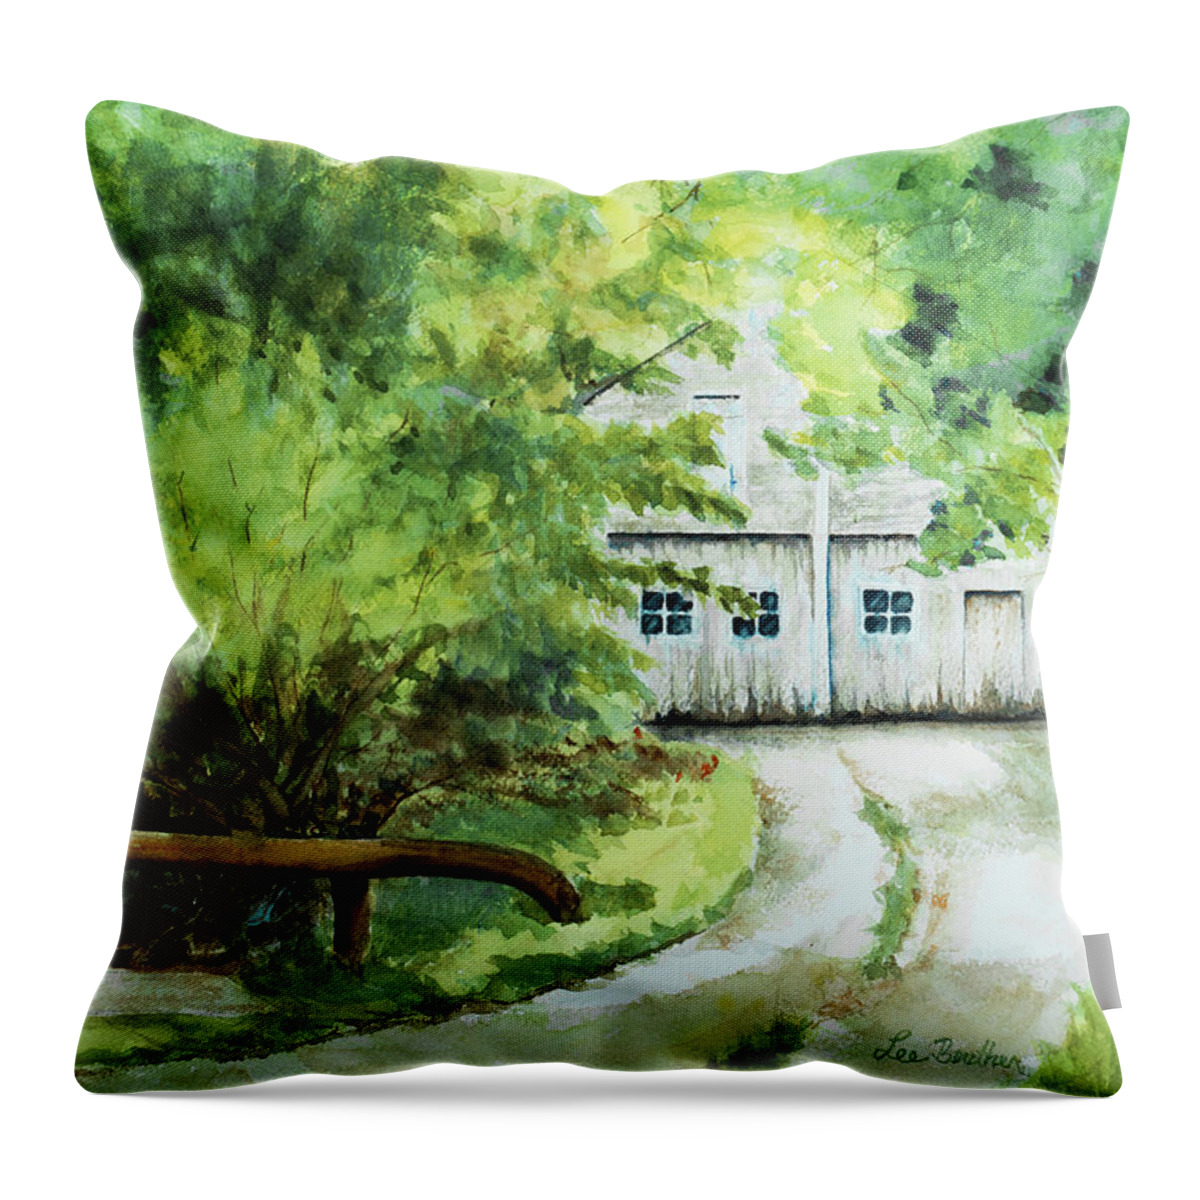 Lee Throw Pillow featuring the painting My Secret Hiding Place by Lee Beuther